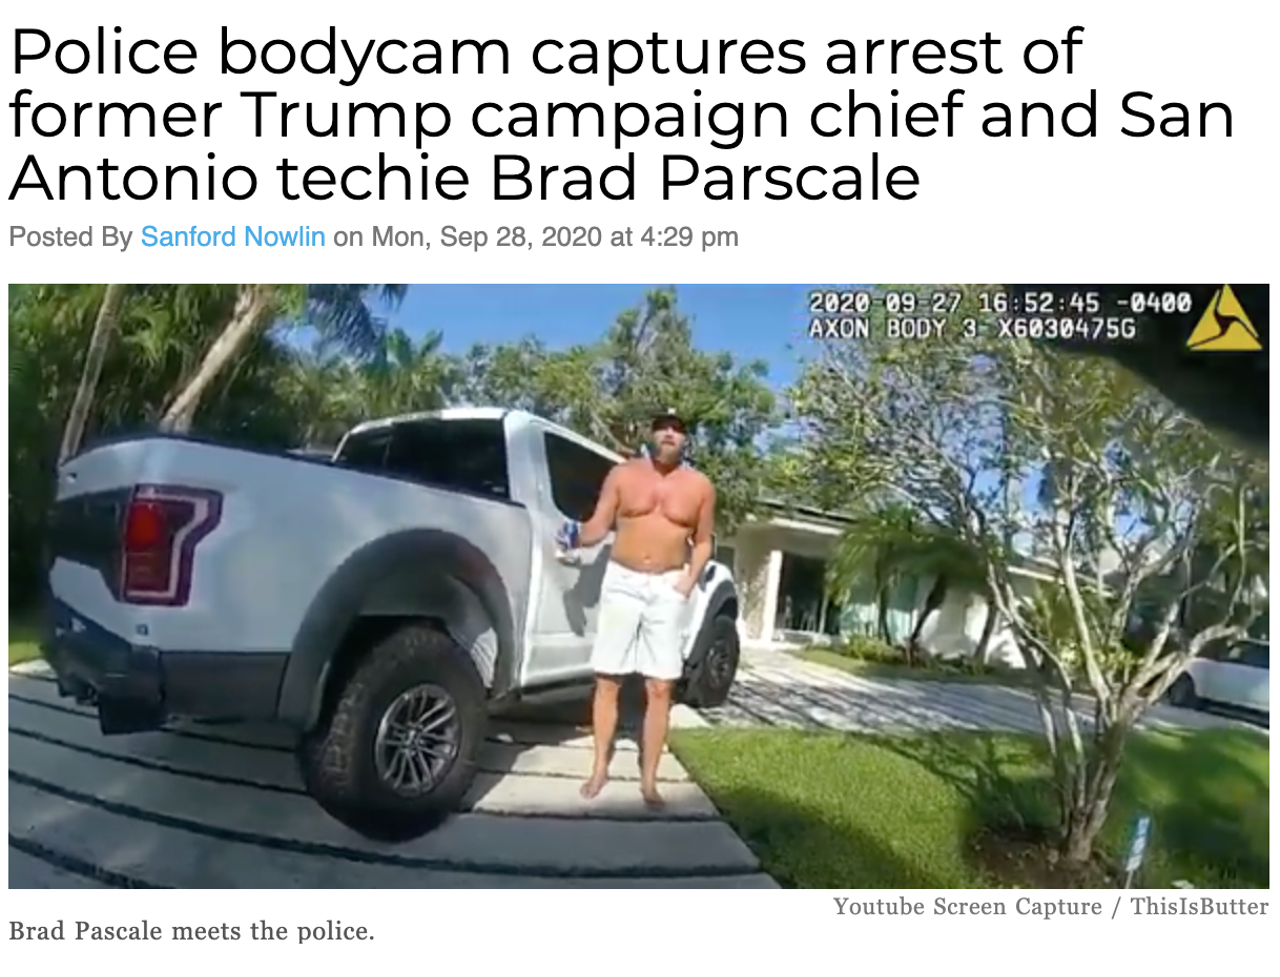 Police bodycam footage shows Florida cops arrest a shirtless, apparently intoxicated Brad Parscale after the Trump campaign official's wife called emergency responders to their residence. Read more here.